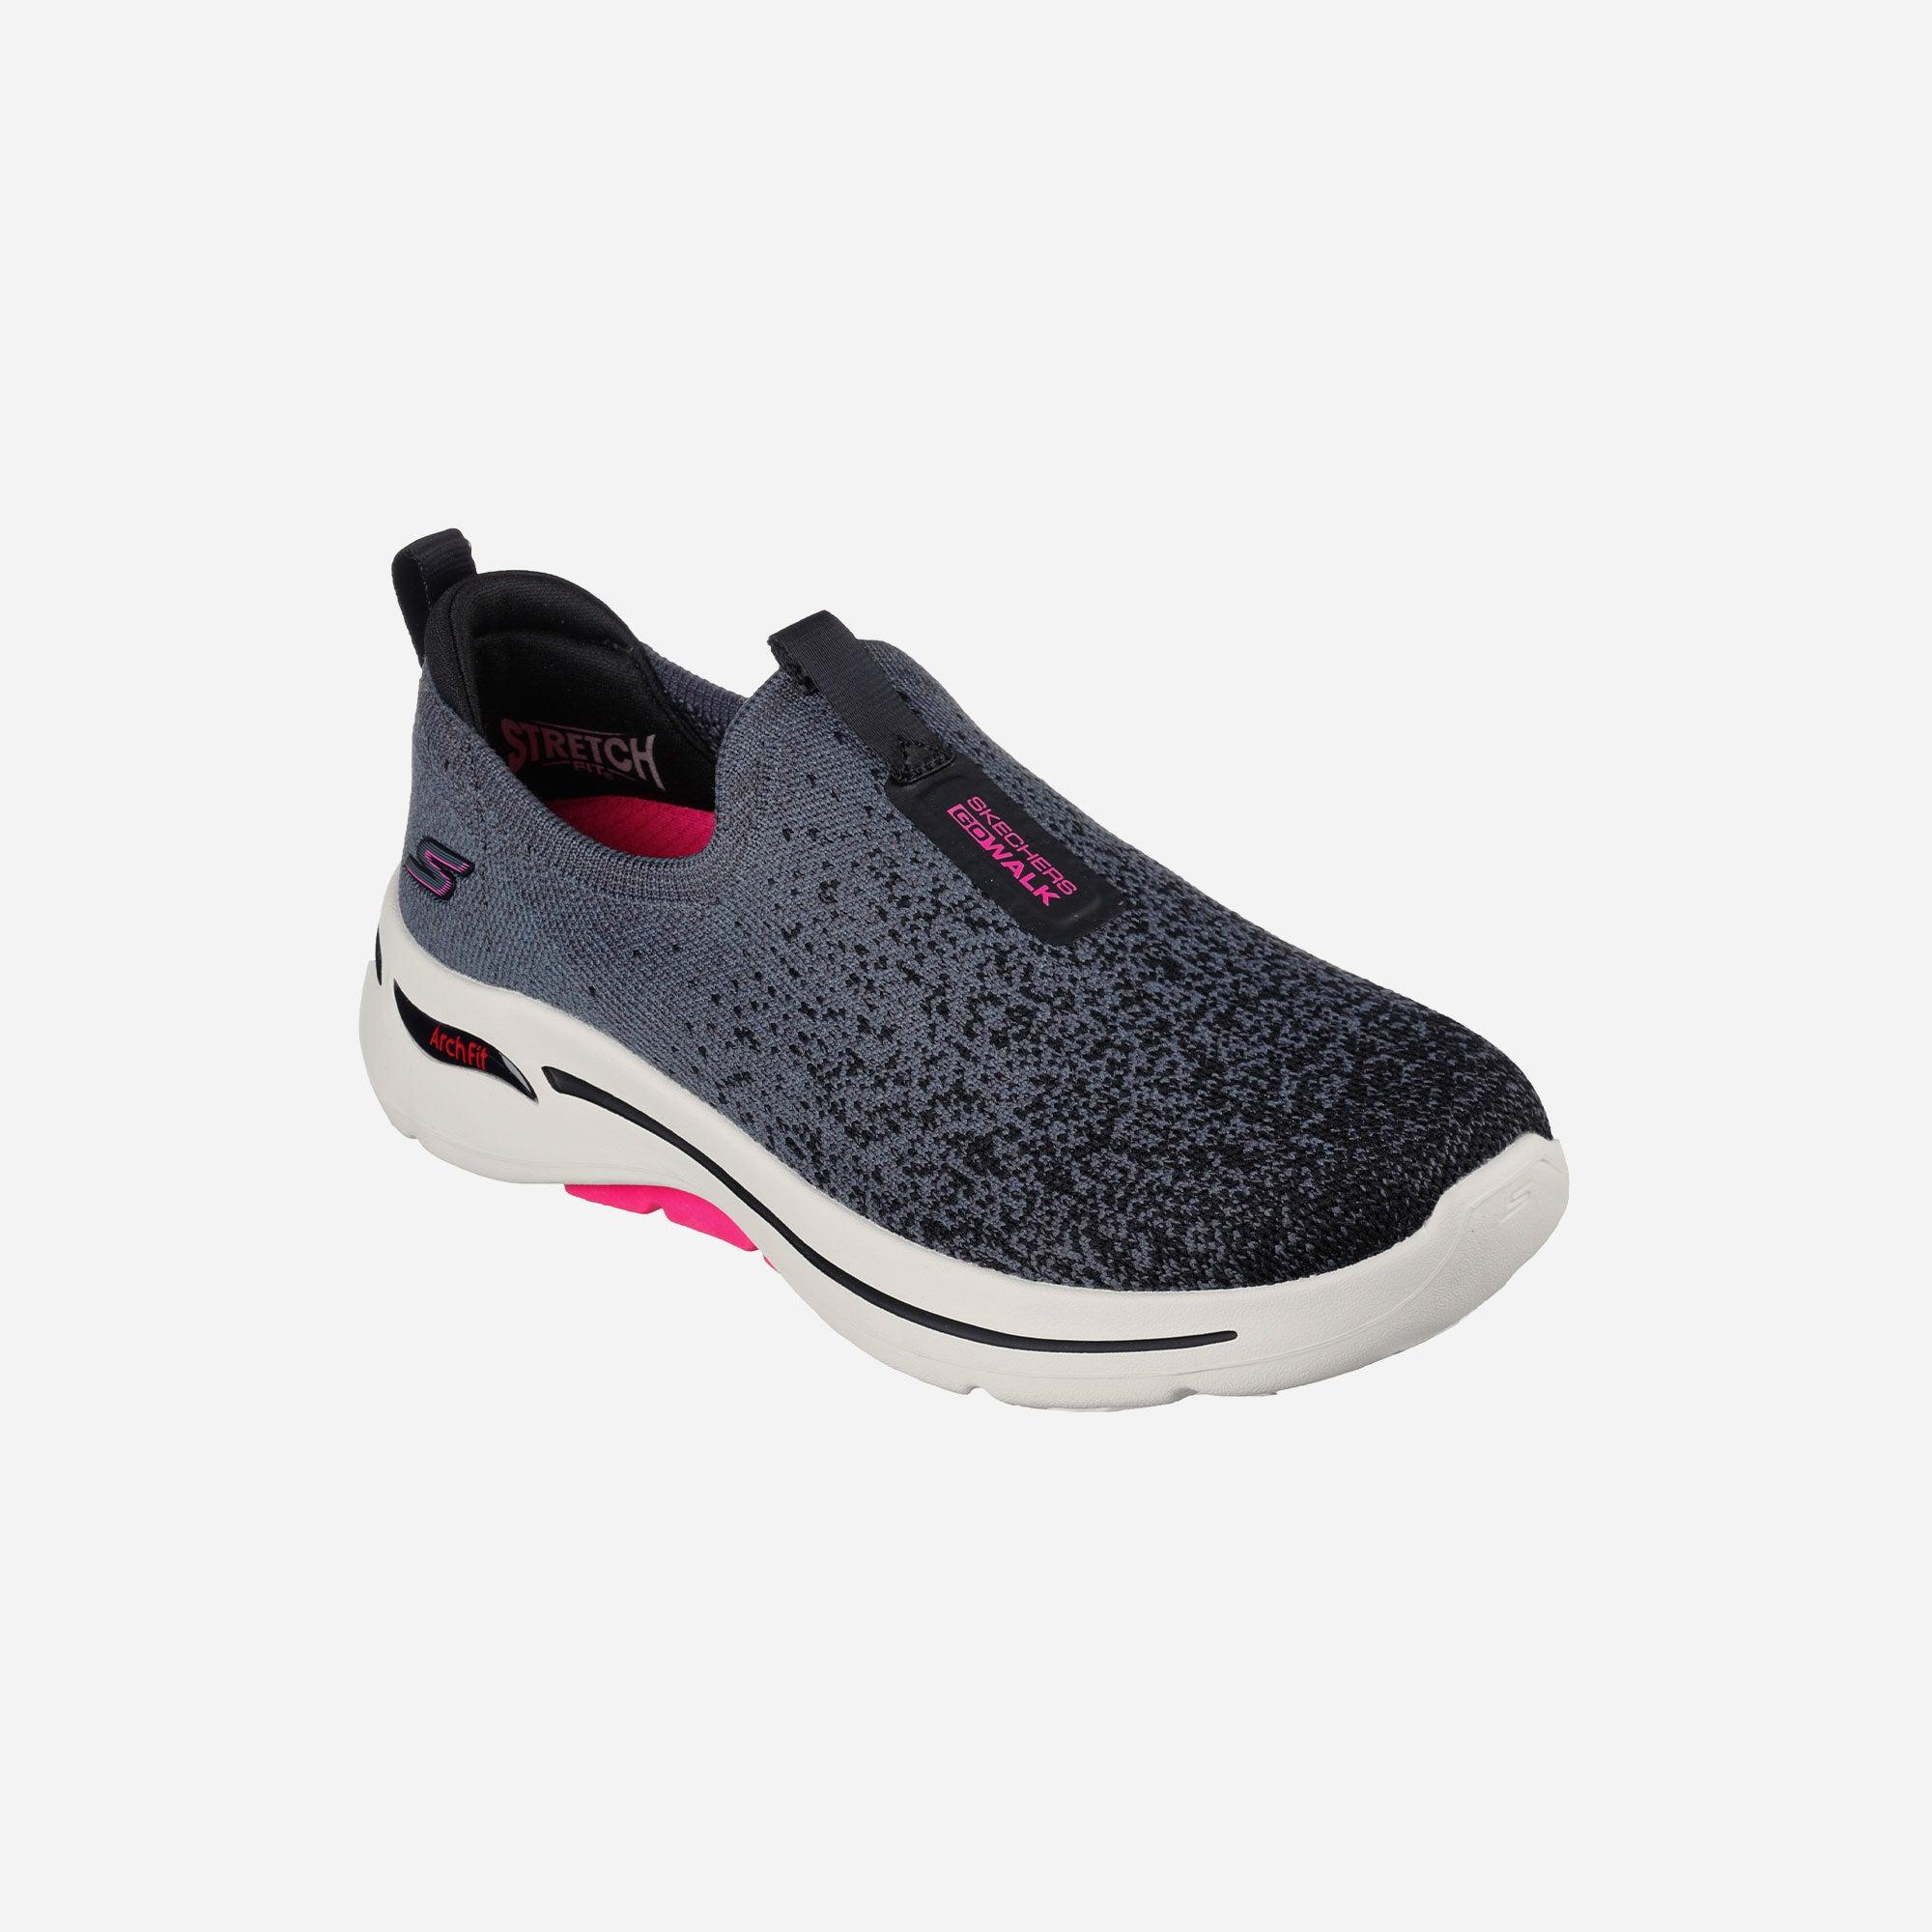 Giày thể thao nữ Skechers Go Walk Arch Fit - 124873